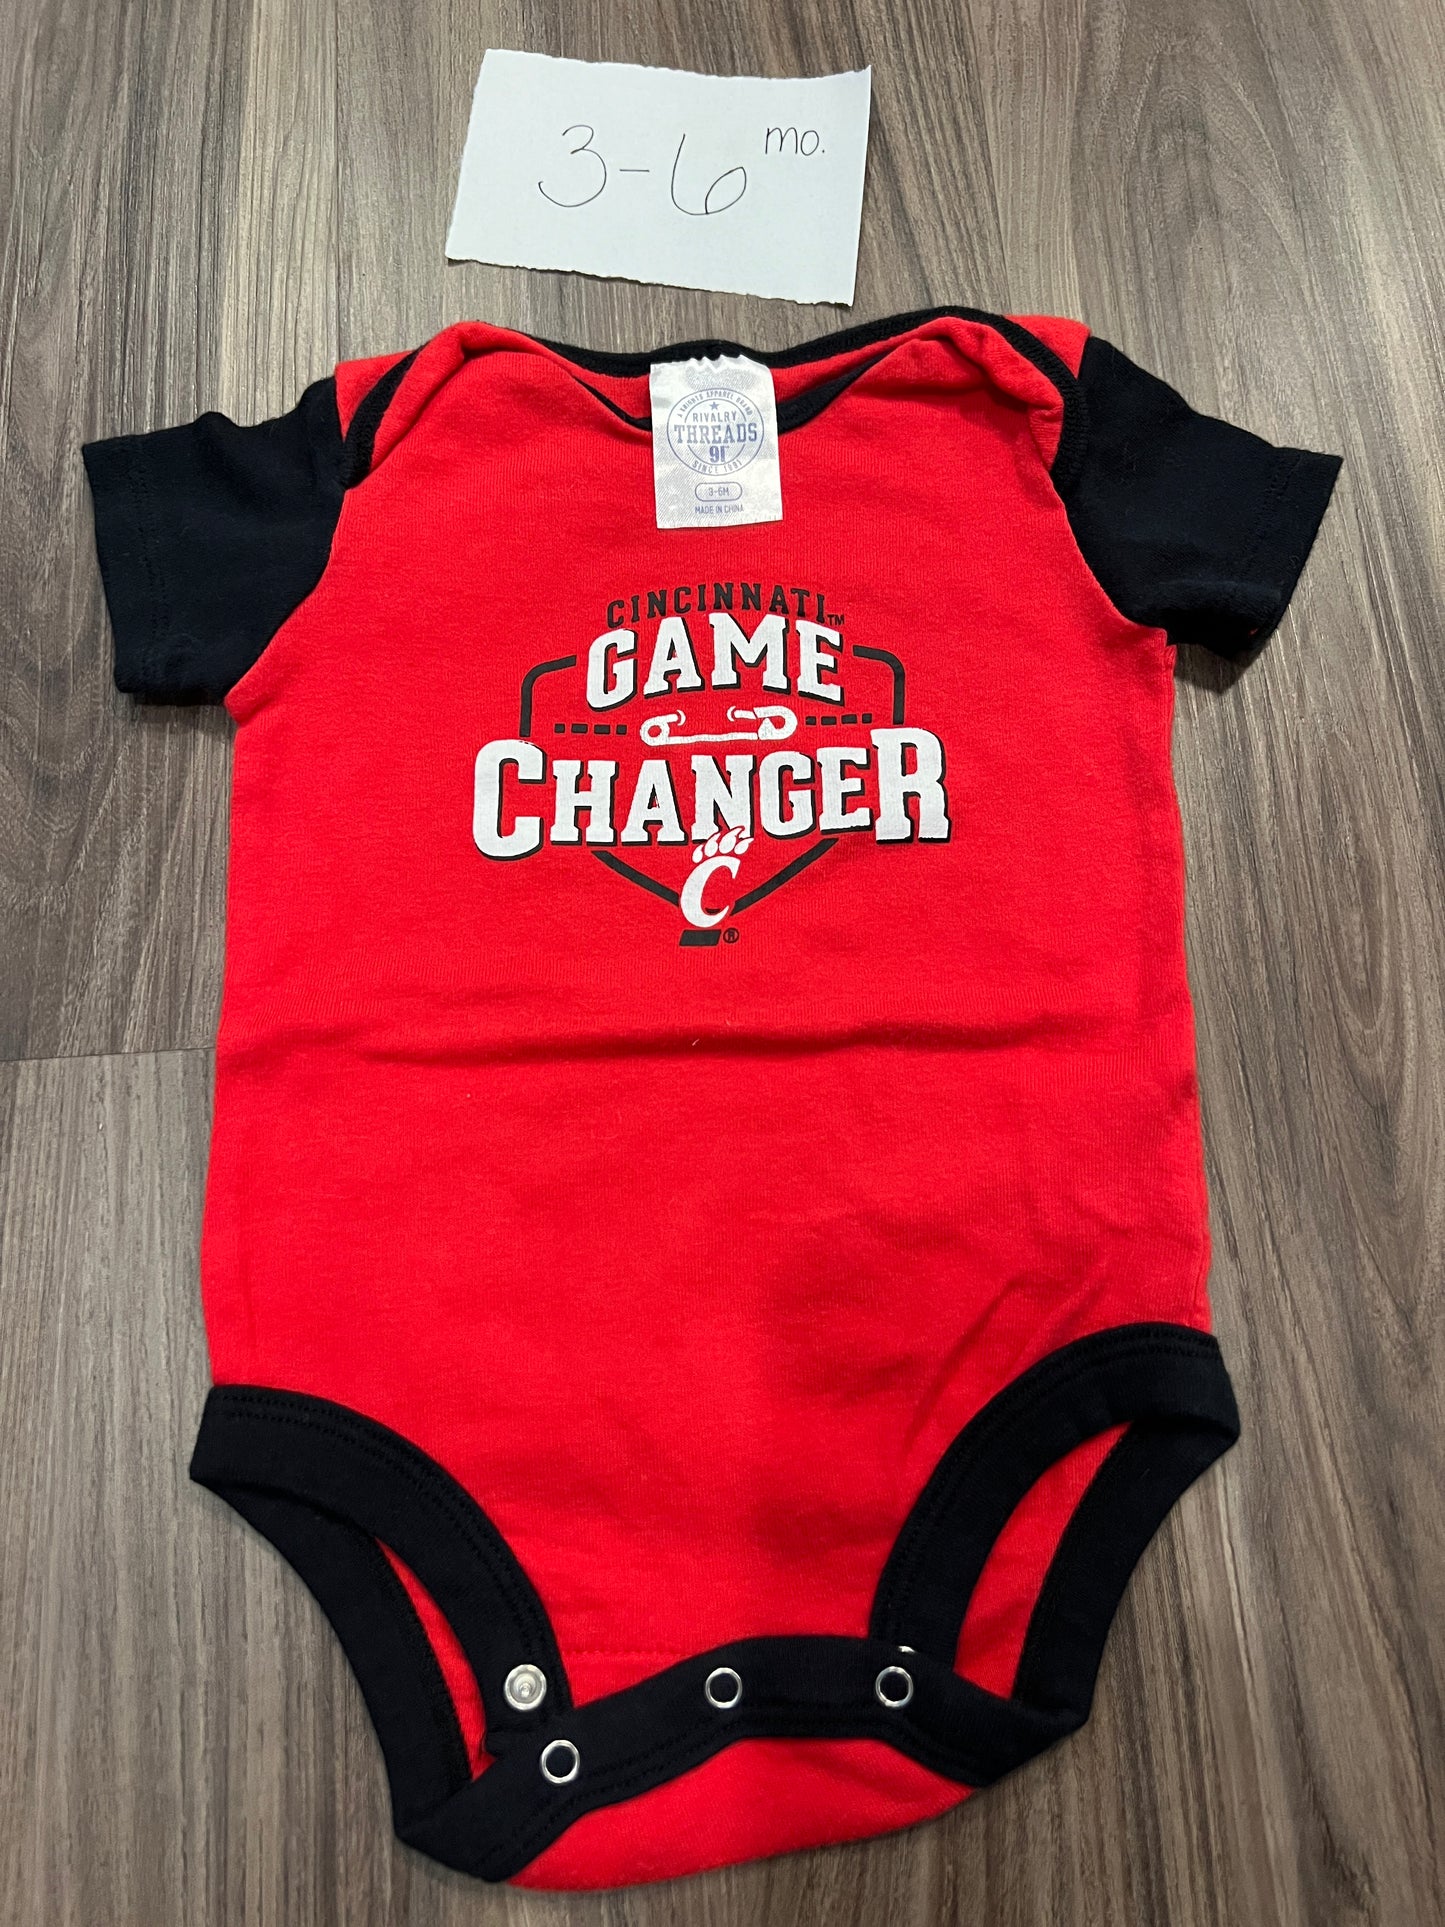 3-6 Mo - Rivalry Threads - UC Red/Black SS Onesie - PU 45236 Except Semiannual Sale